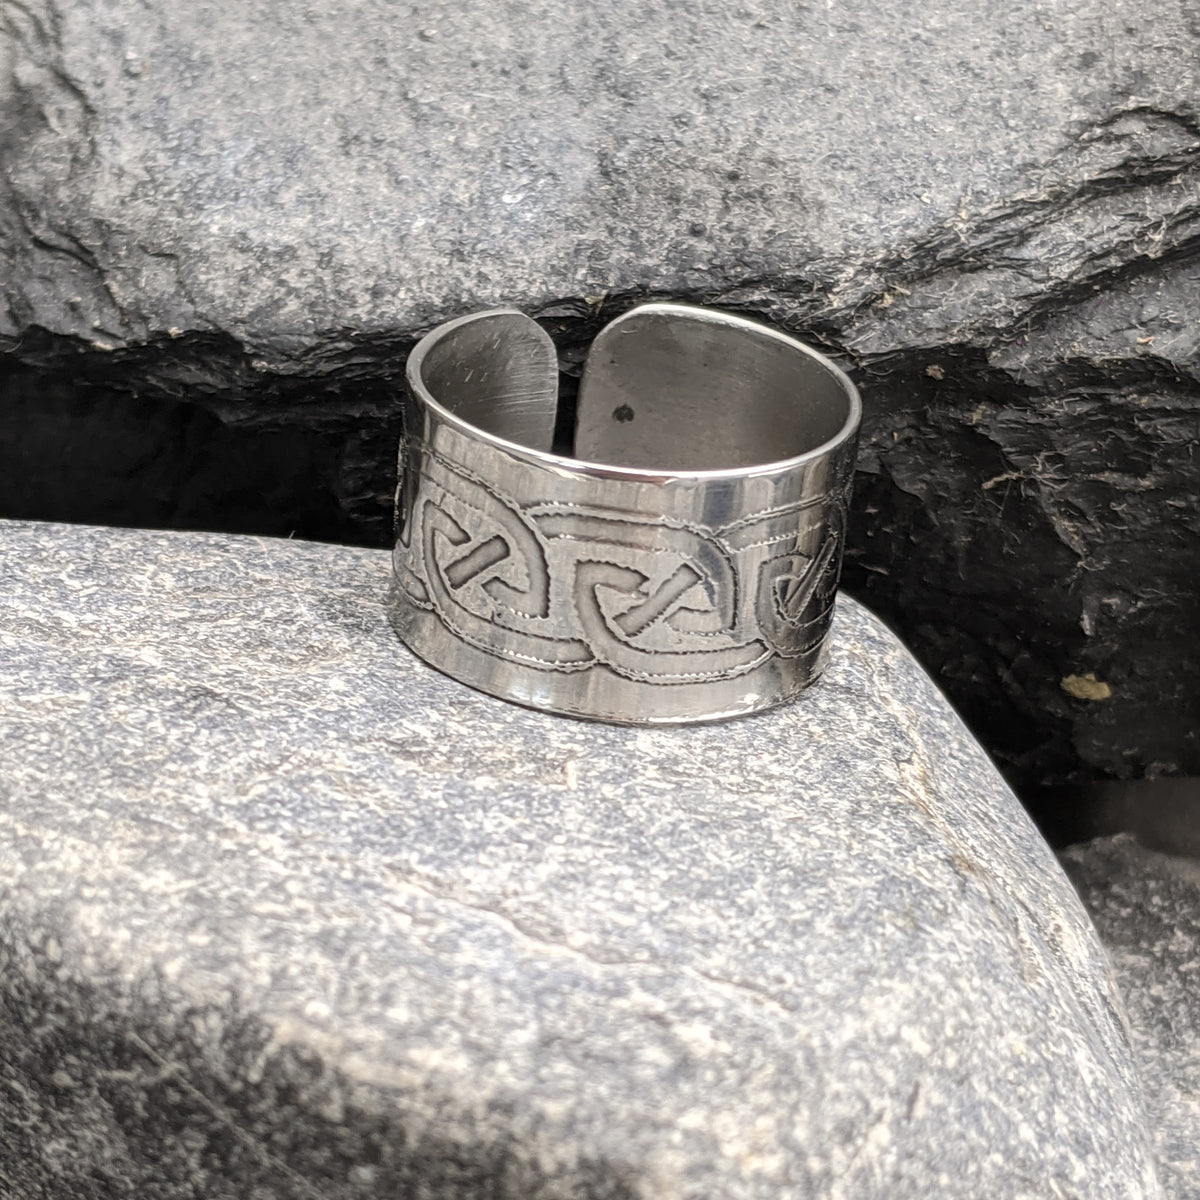 Celtic knot ring, Stainless Steel adjustable ring with Celtic knot design